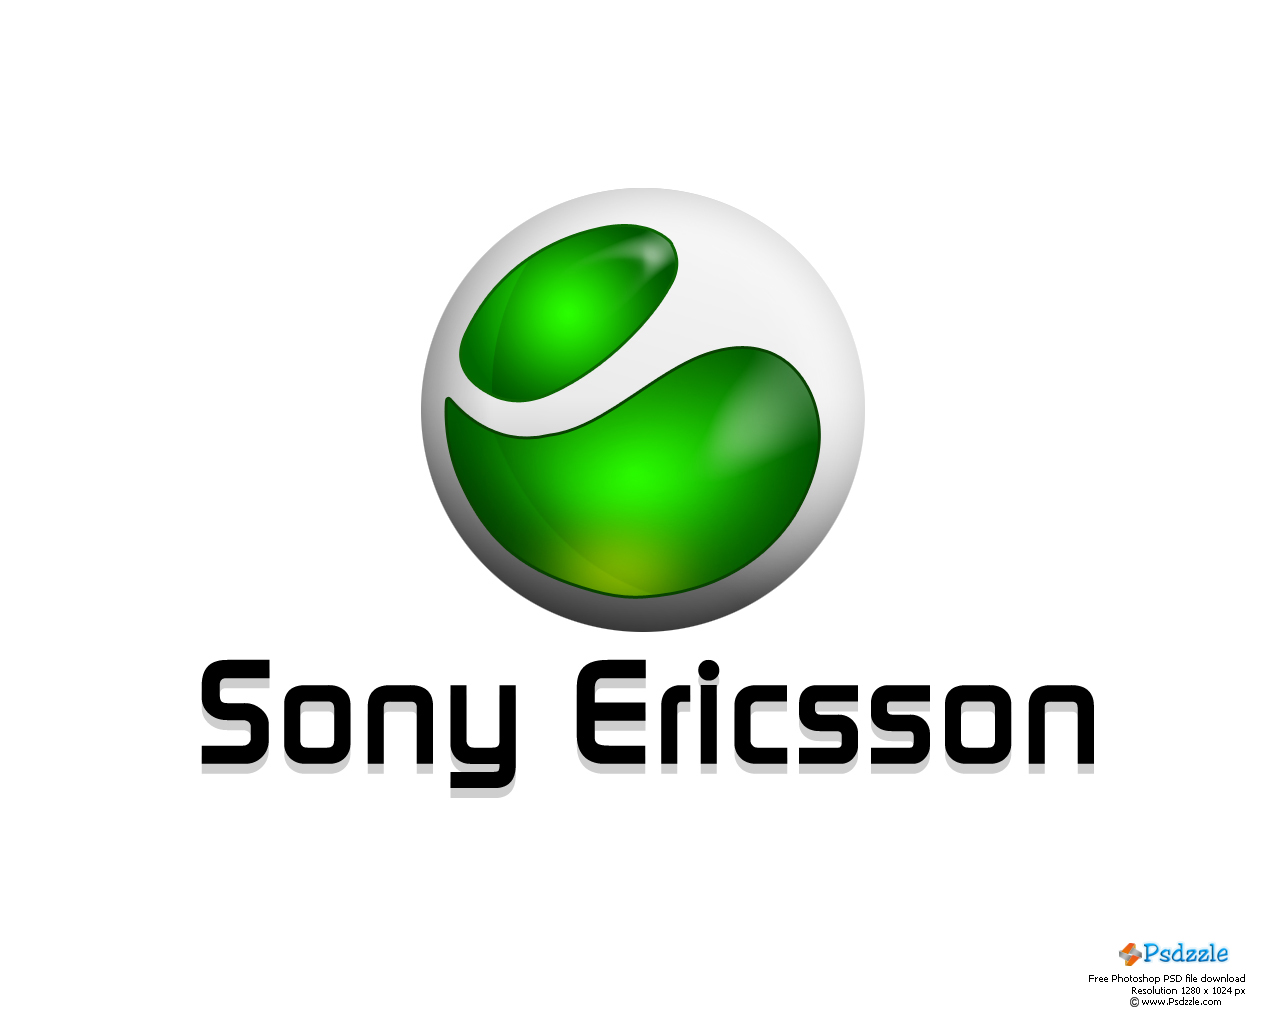 Sony Ericsson Logo Wallpapers | New Best Wallpapers 2011 ...